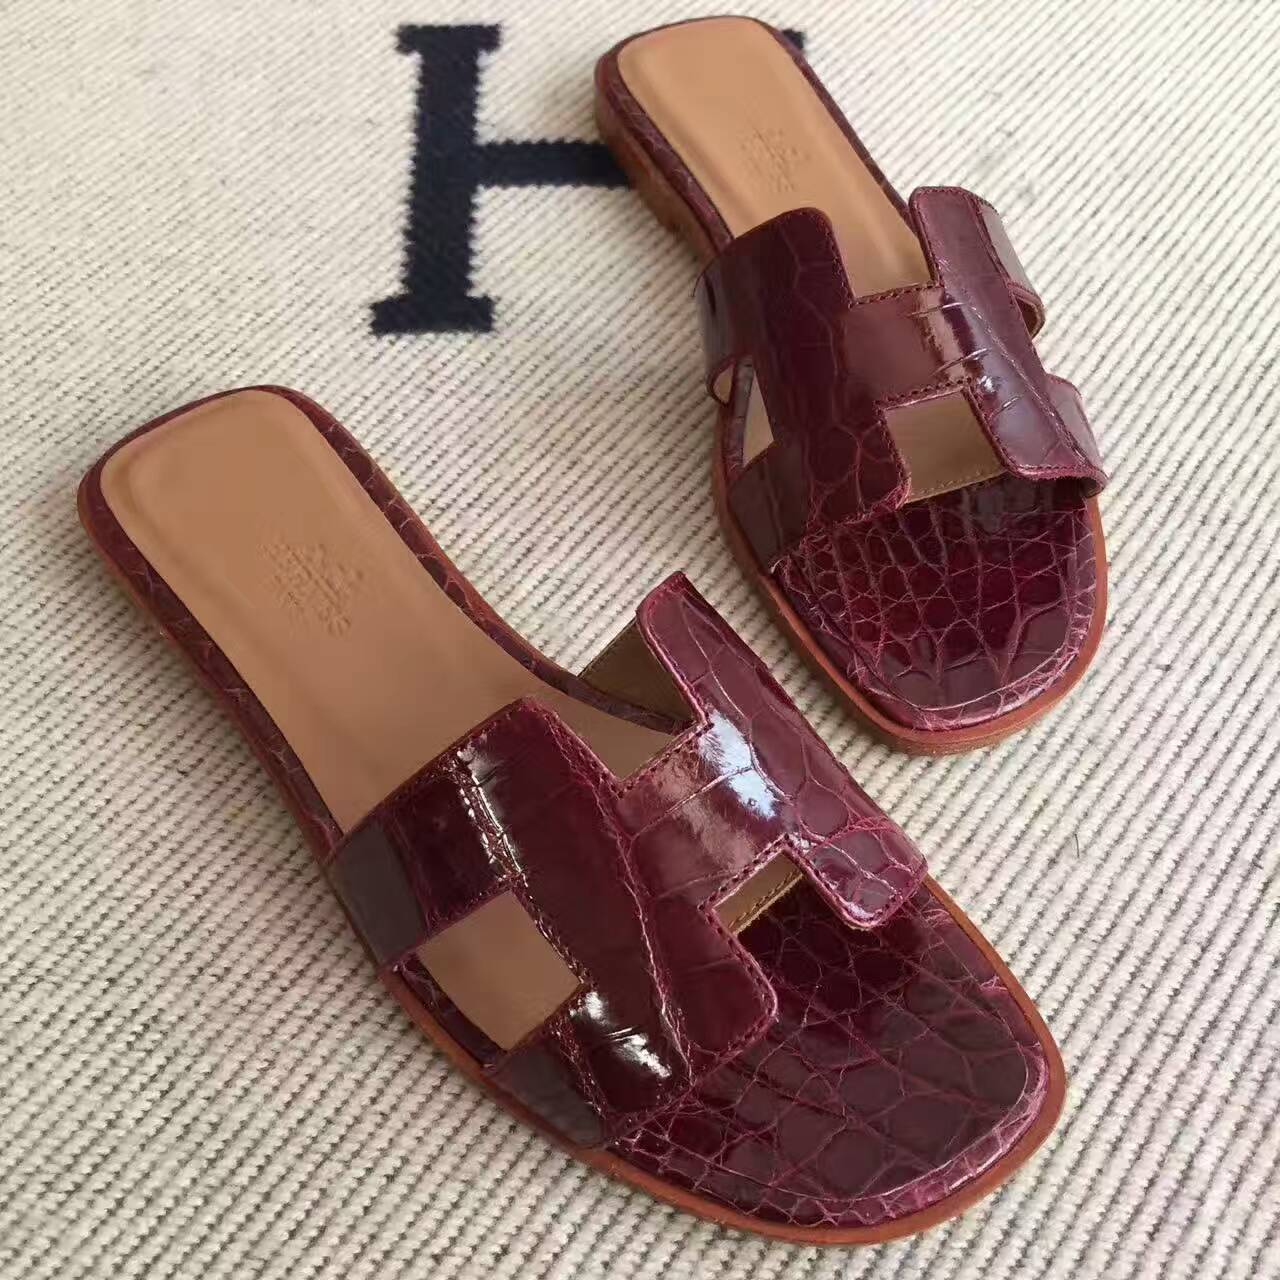 Hand Stitching Hermes Crocodile Leather Sandals Shoes in CK57 Bordeaux ...